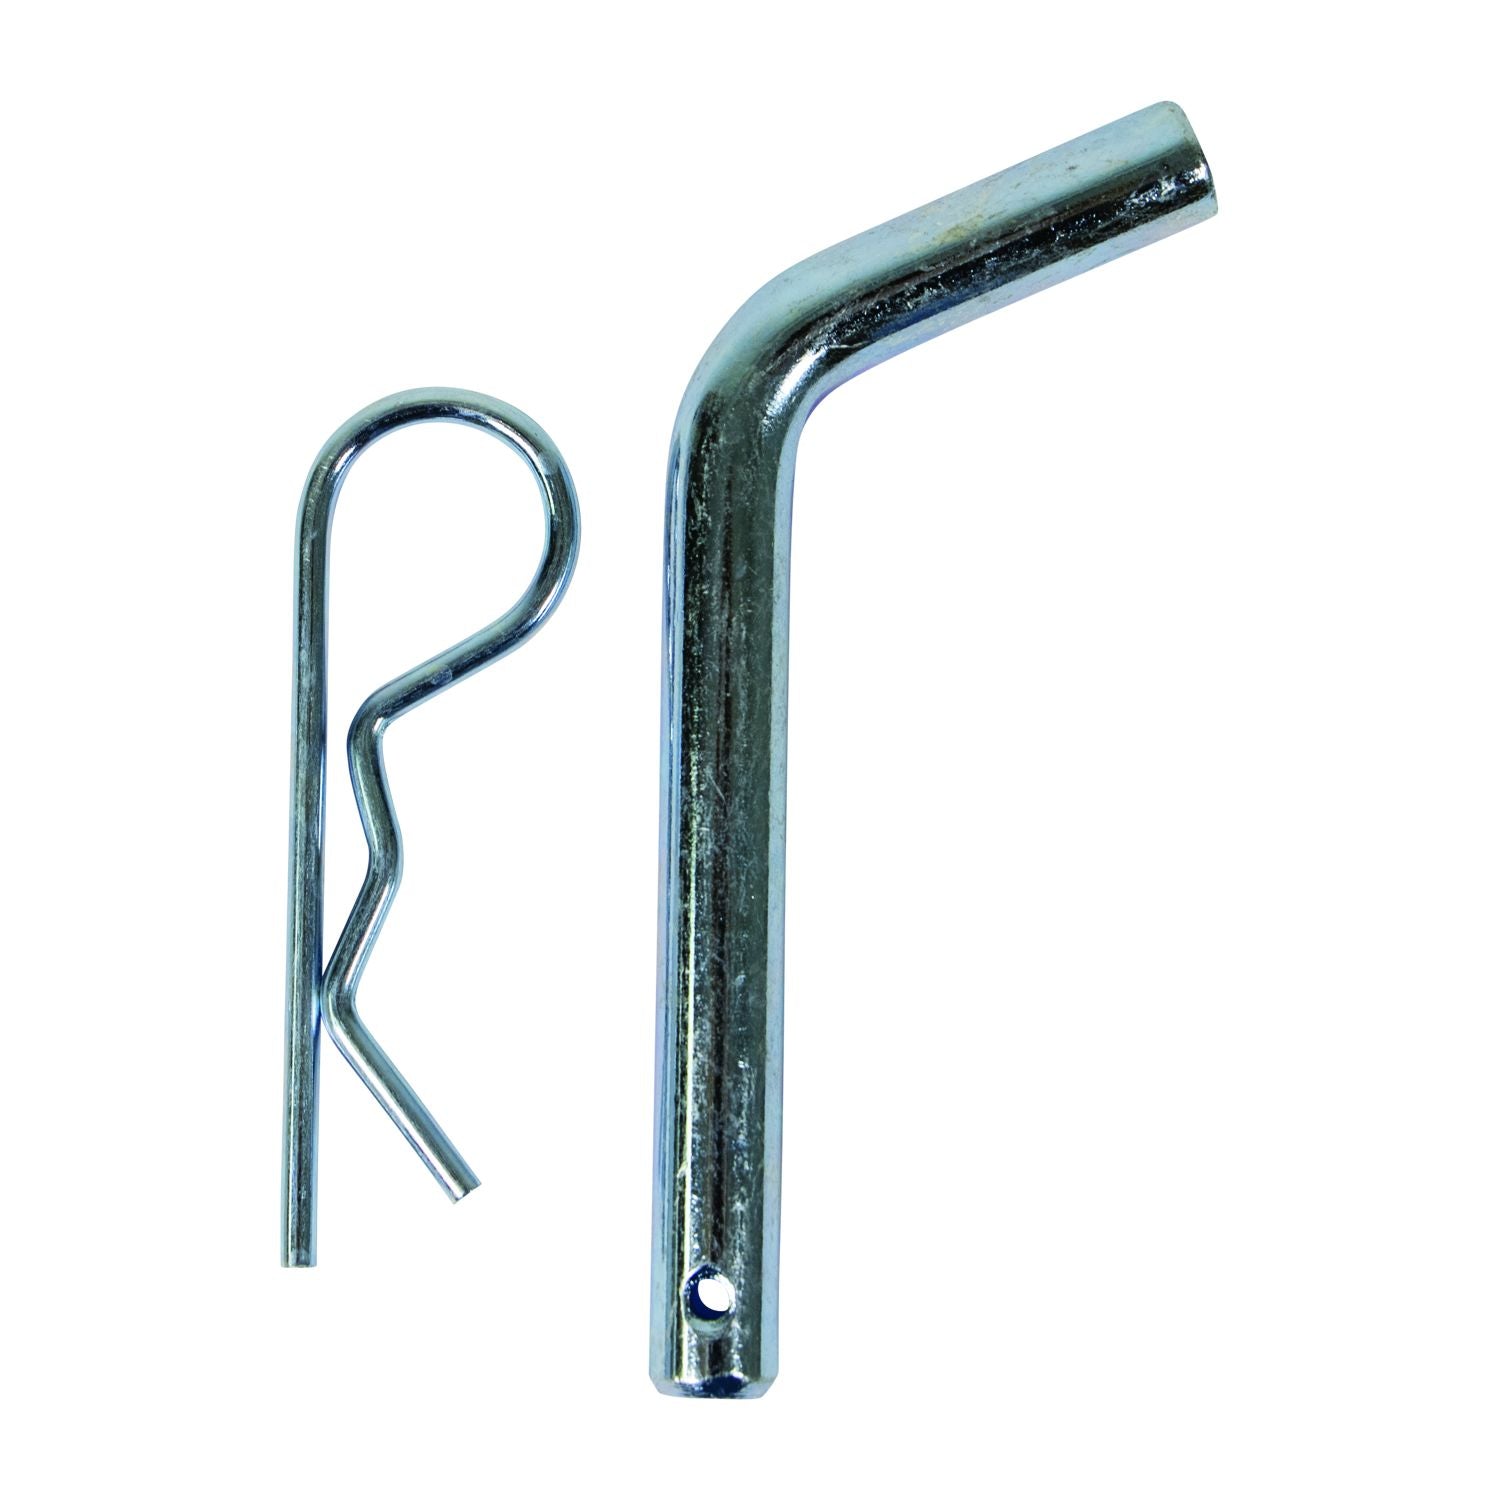 RT 22-0400-10 - Hitch Pins 1/2" and Clips